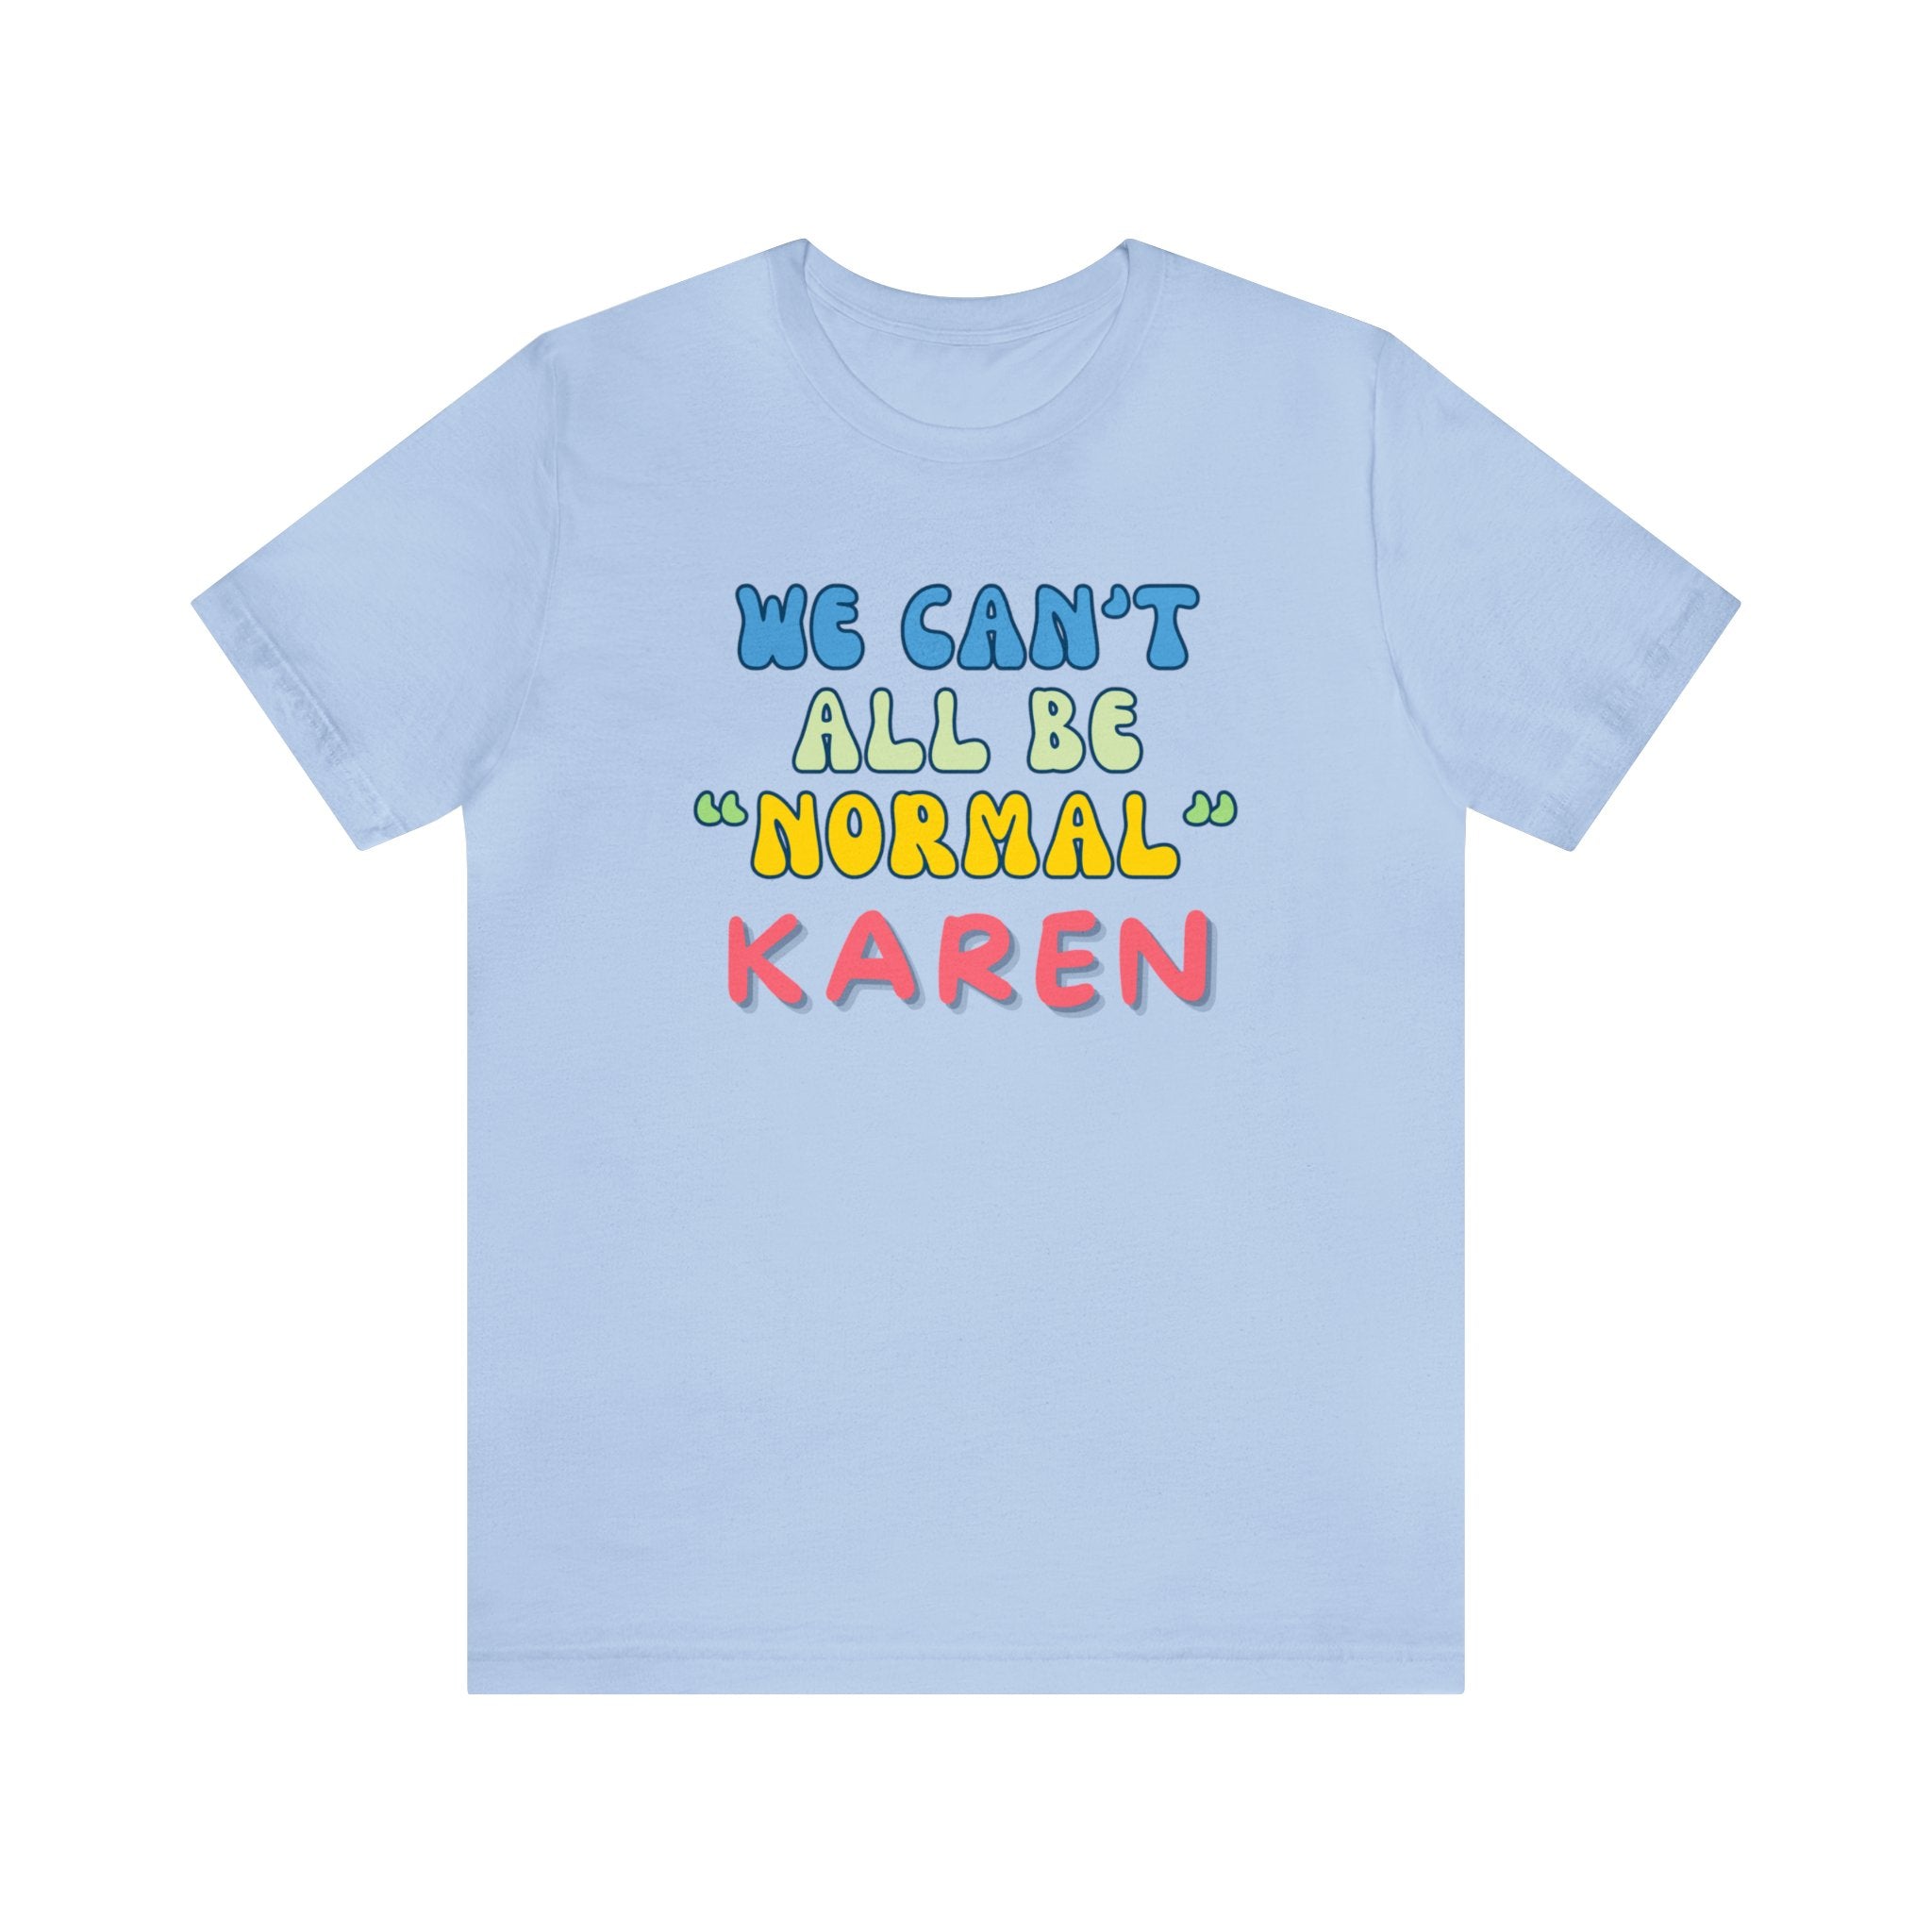 We Can't All Be Normal, Karen! : Unisex 100% Comfy Cotton, T-Shirt by Bella+Canvas